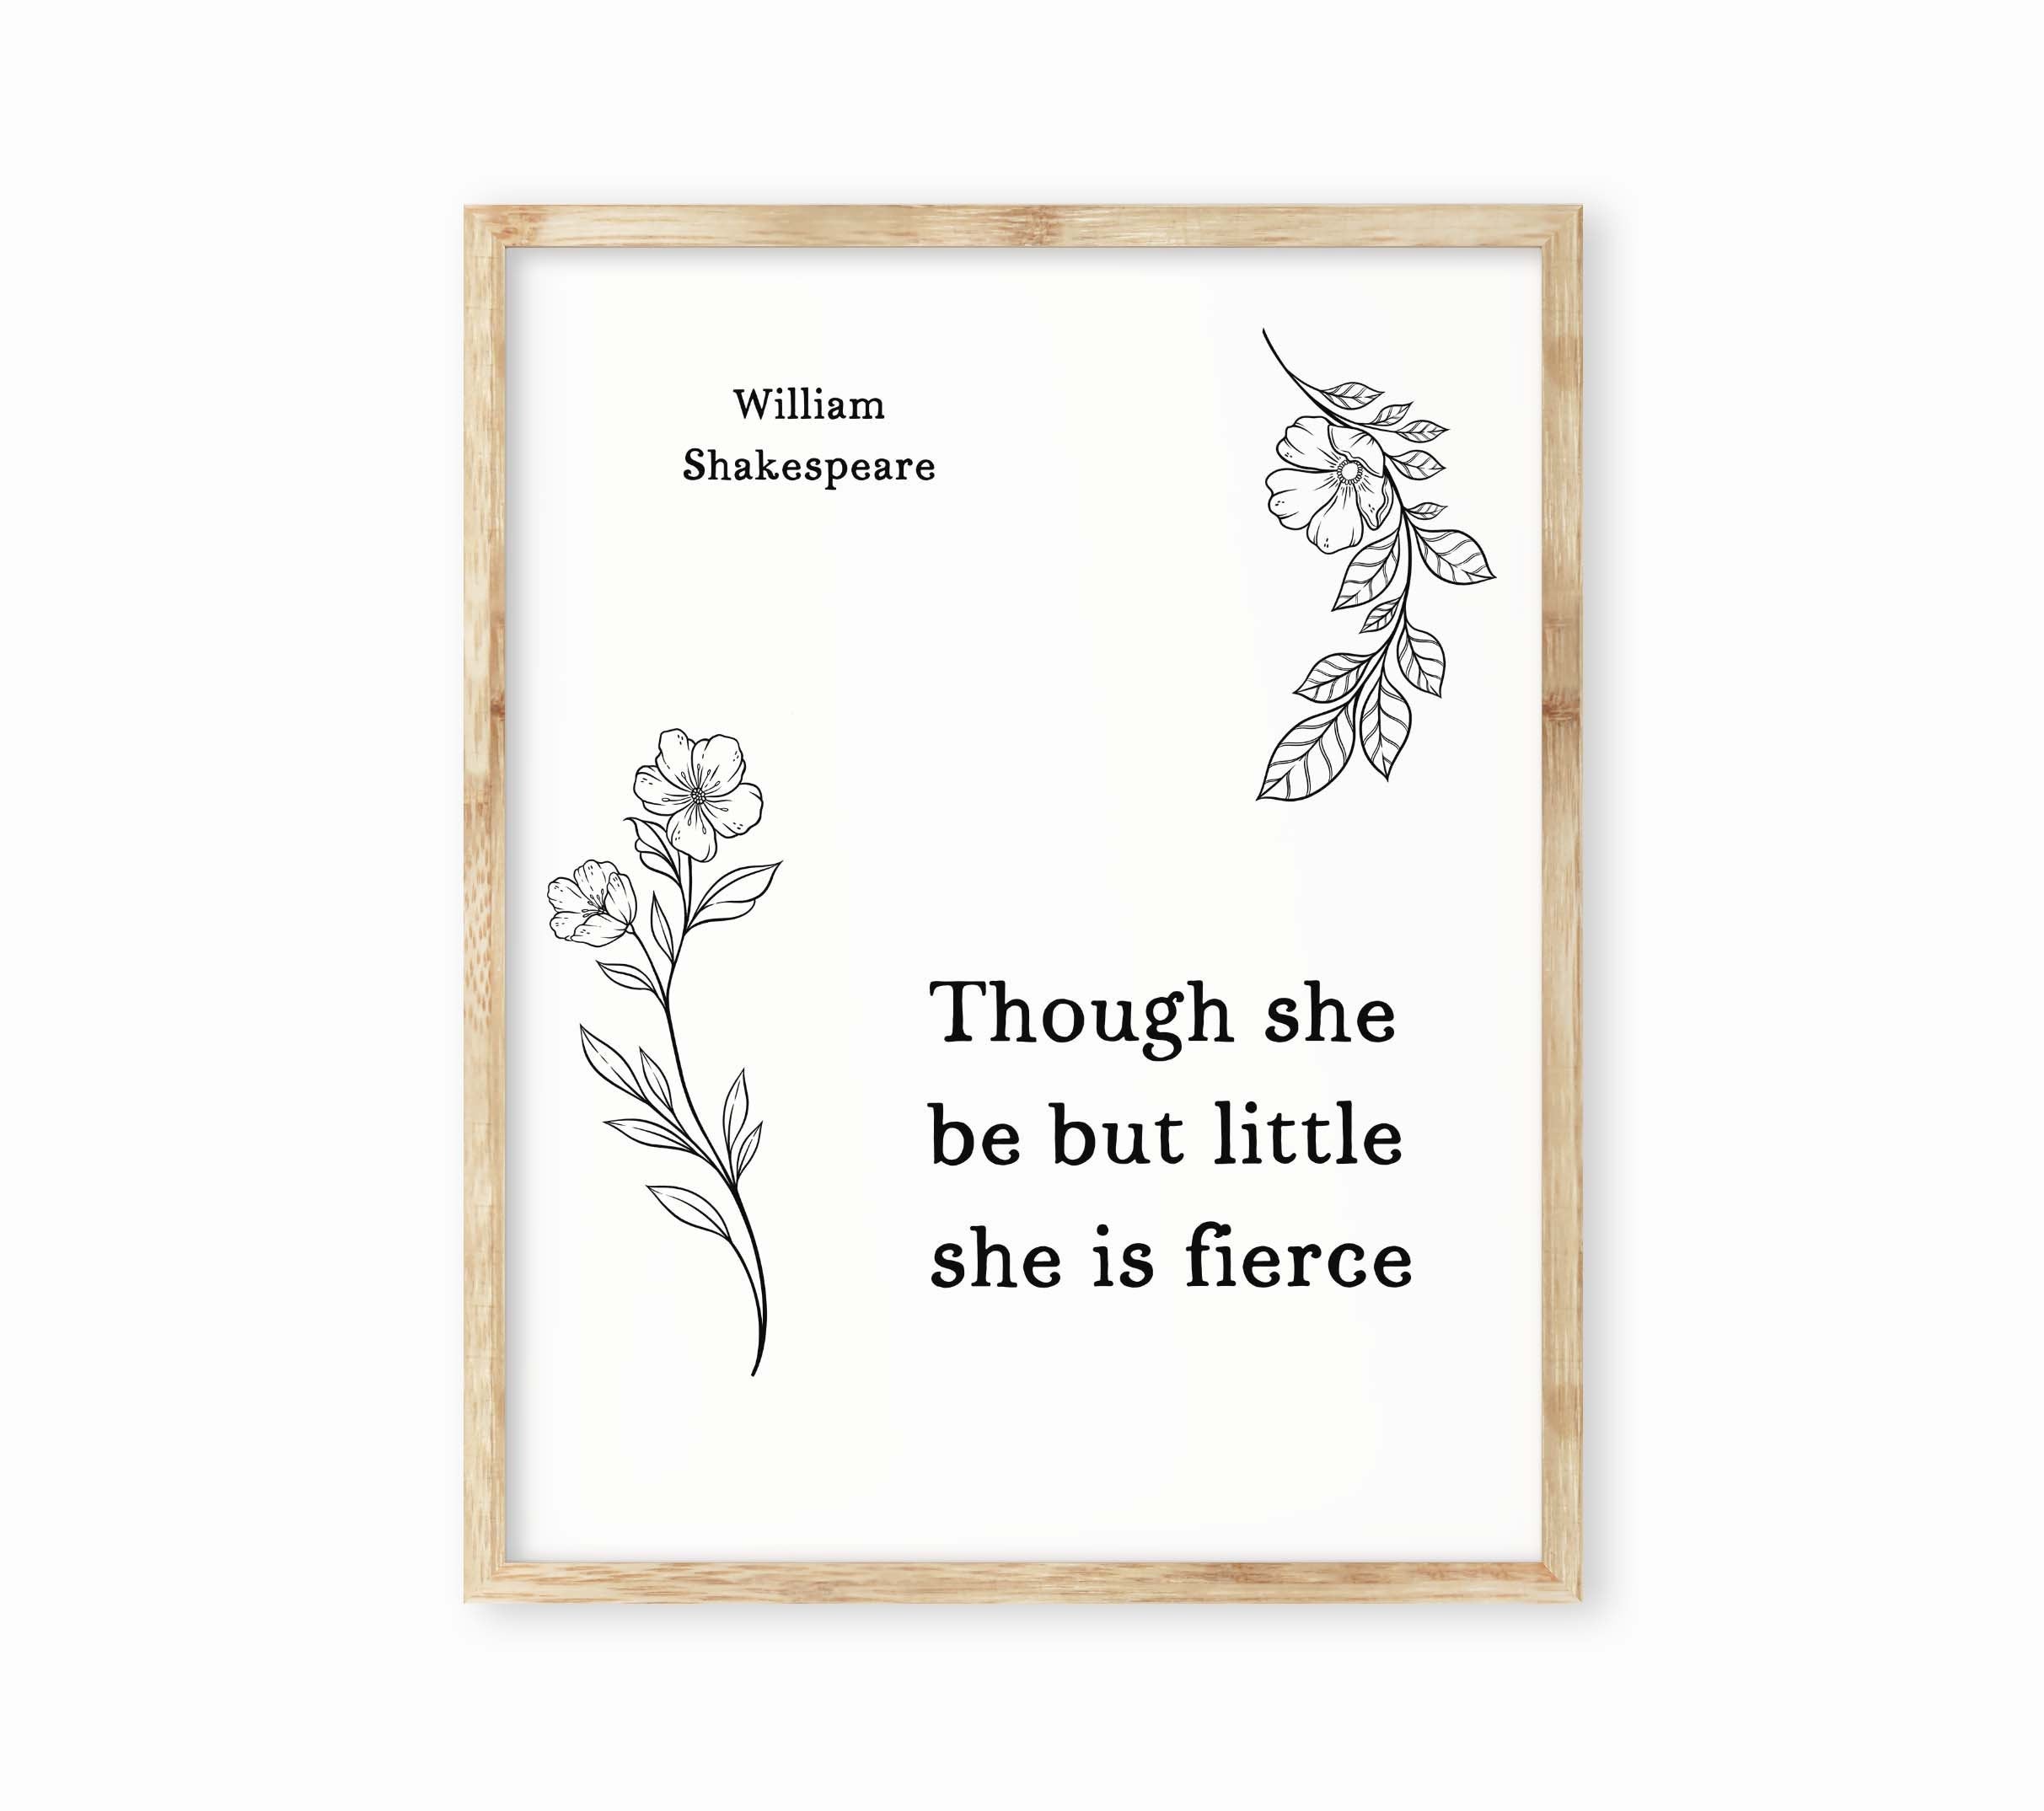 Though She Be But Little She Is Fierce Wall Art Prints, William Shakespeare Nights Dream